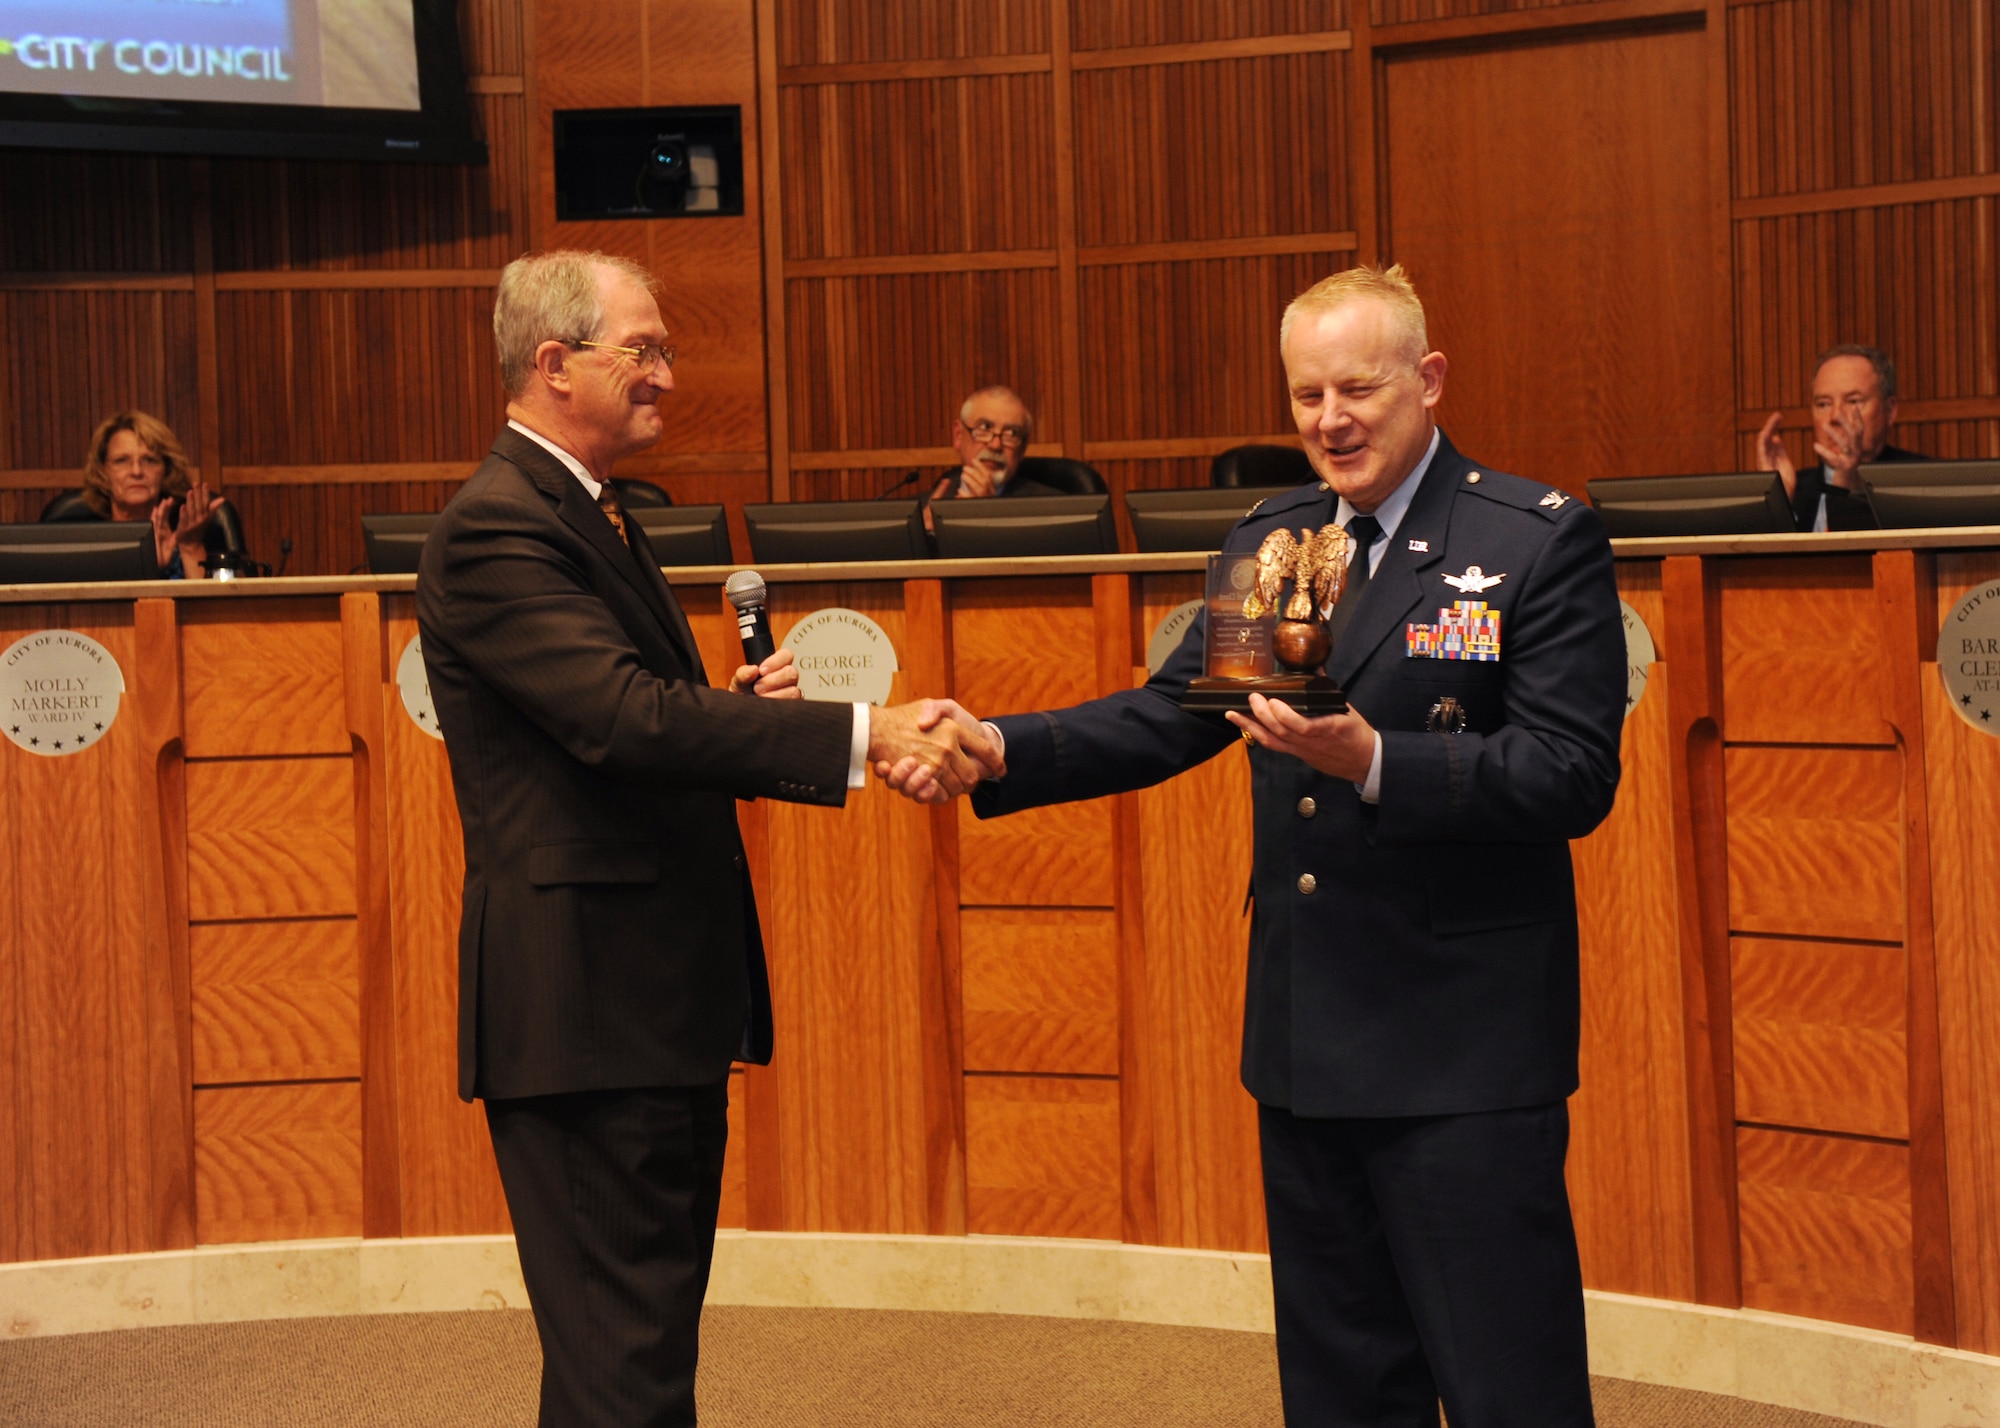 Col. Dan Dant, 460th Space Wing commander, receives an award from Aurora Mayor Steve Hogan and the Aurora City Council members, June 3, 2013, at the Aurora Municipal Center, Colo. The mayor presented Dant with an award, thanking him for his time and dedication to the community and wished him luck on his upcoming assignment. (U.S. Air Force photo by Senior Airman Marcy Glass/Release)